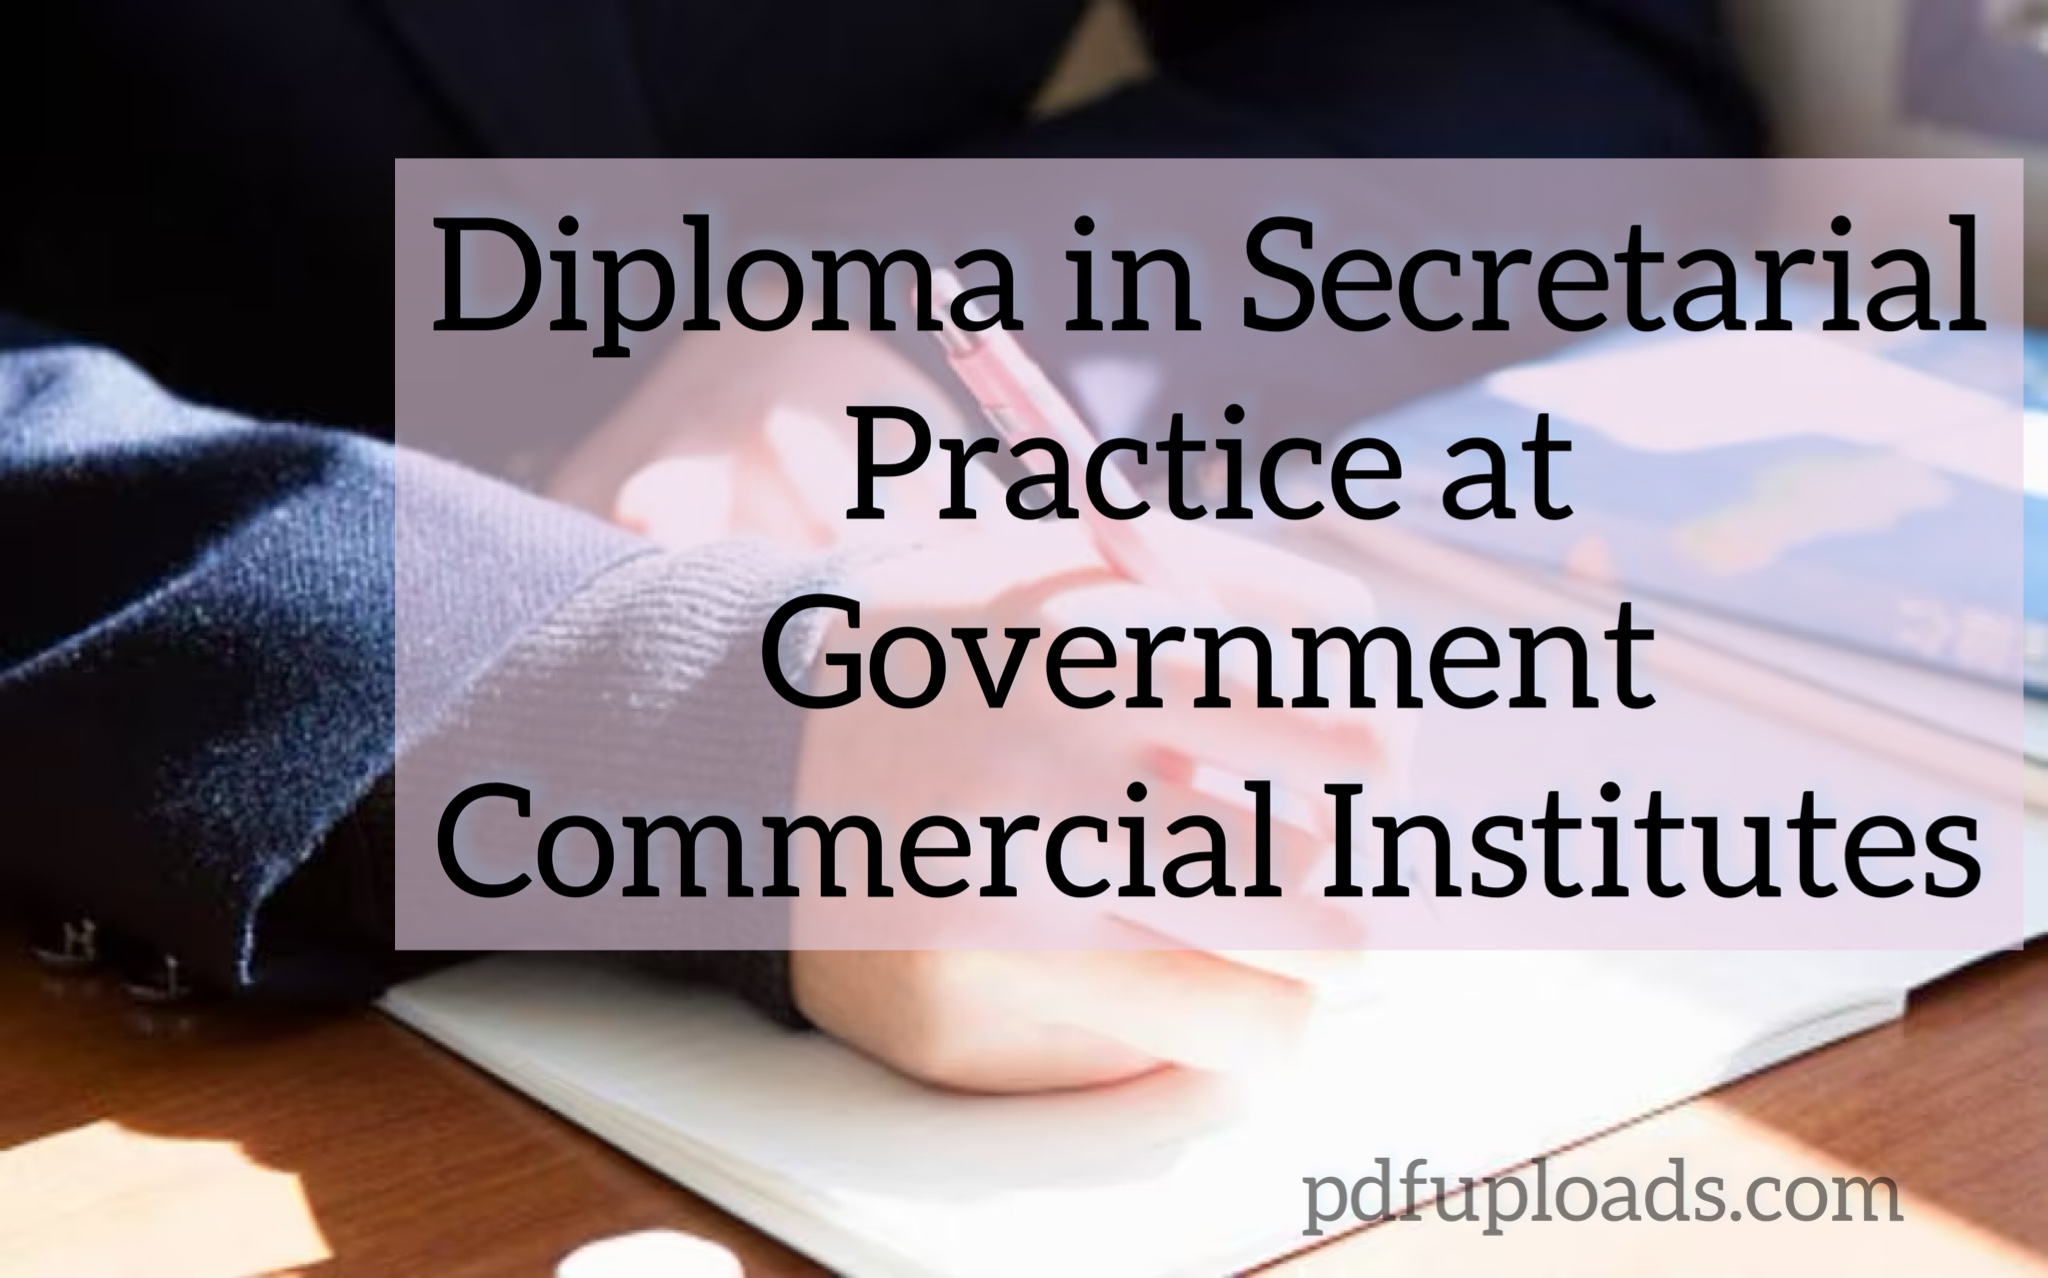 Diploma in Secretarial Practice at Government Commercial Institutes